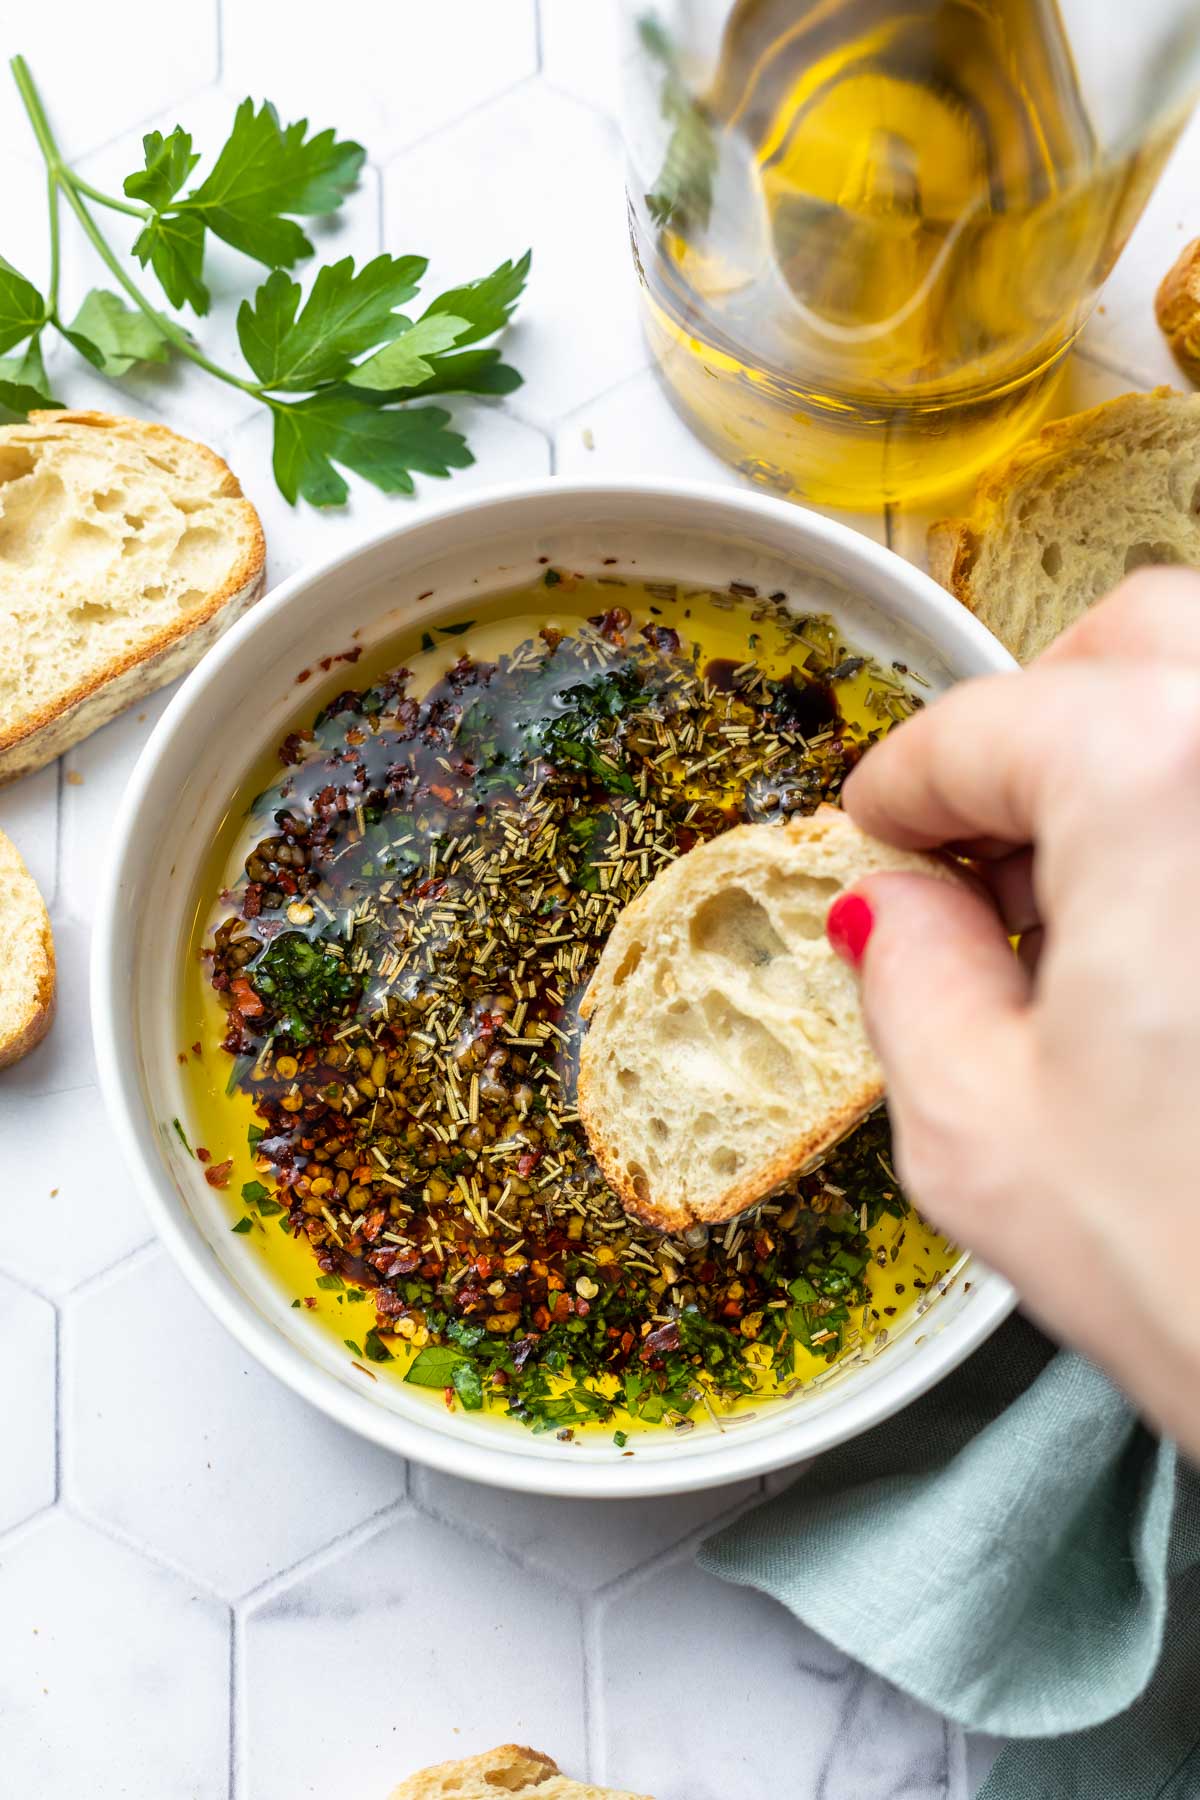 hand dipping a slice of bread into dipping oil with herbs and balsamic vinegar